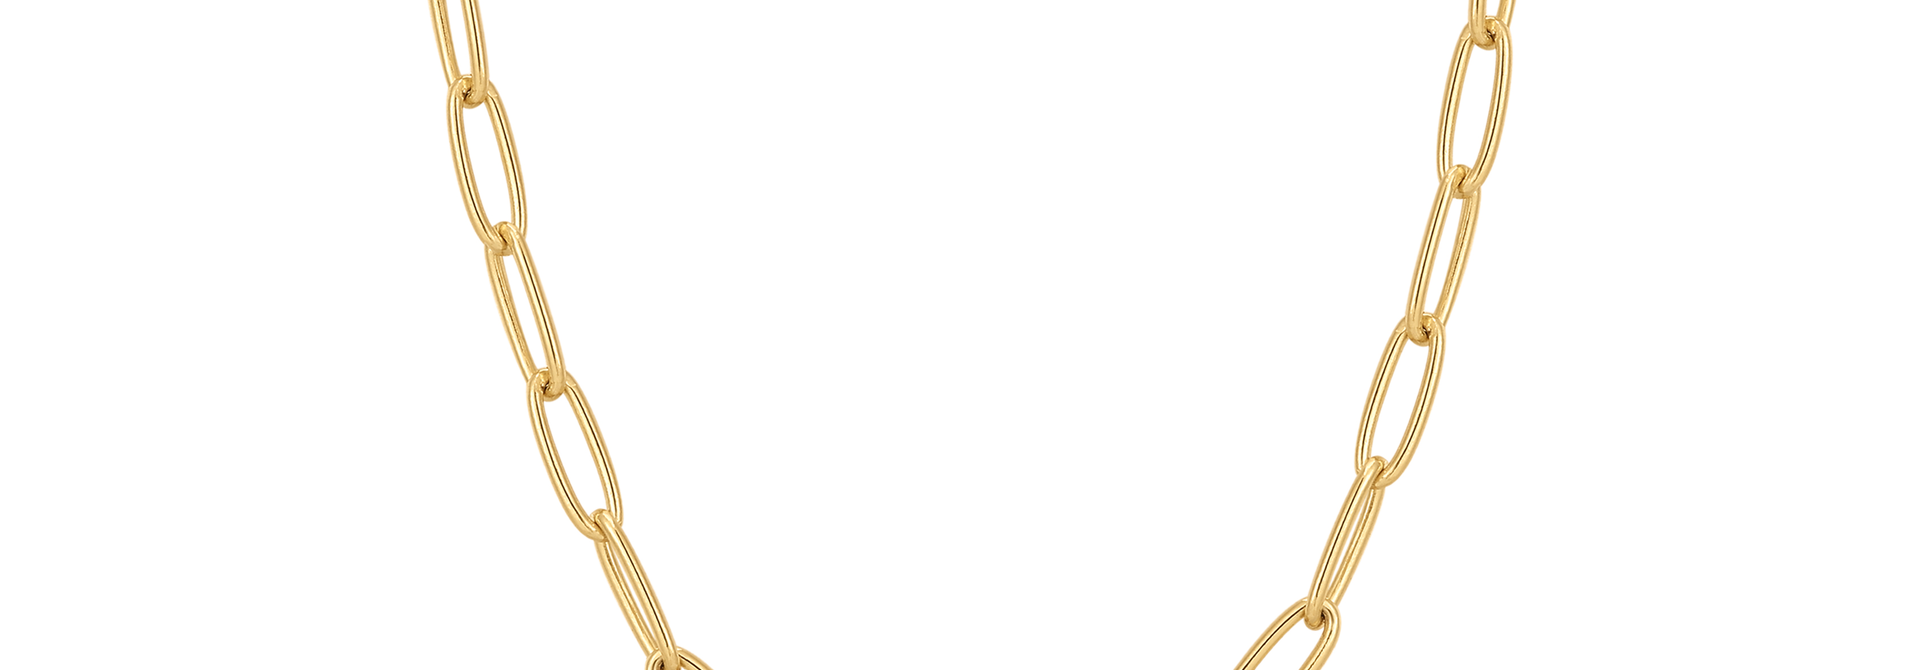 Link Bedel Chain Connector Ketting - Gold plated